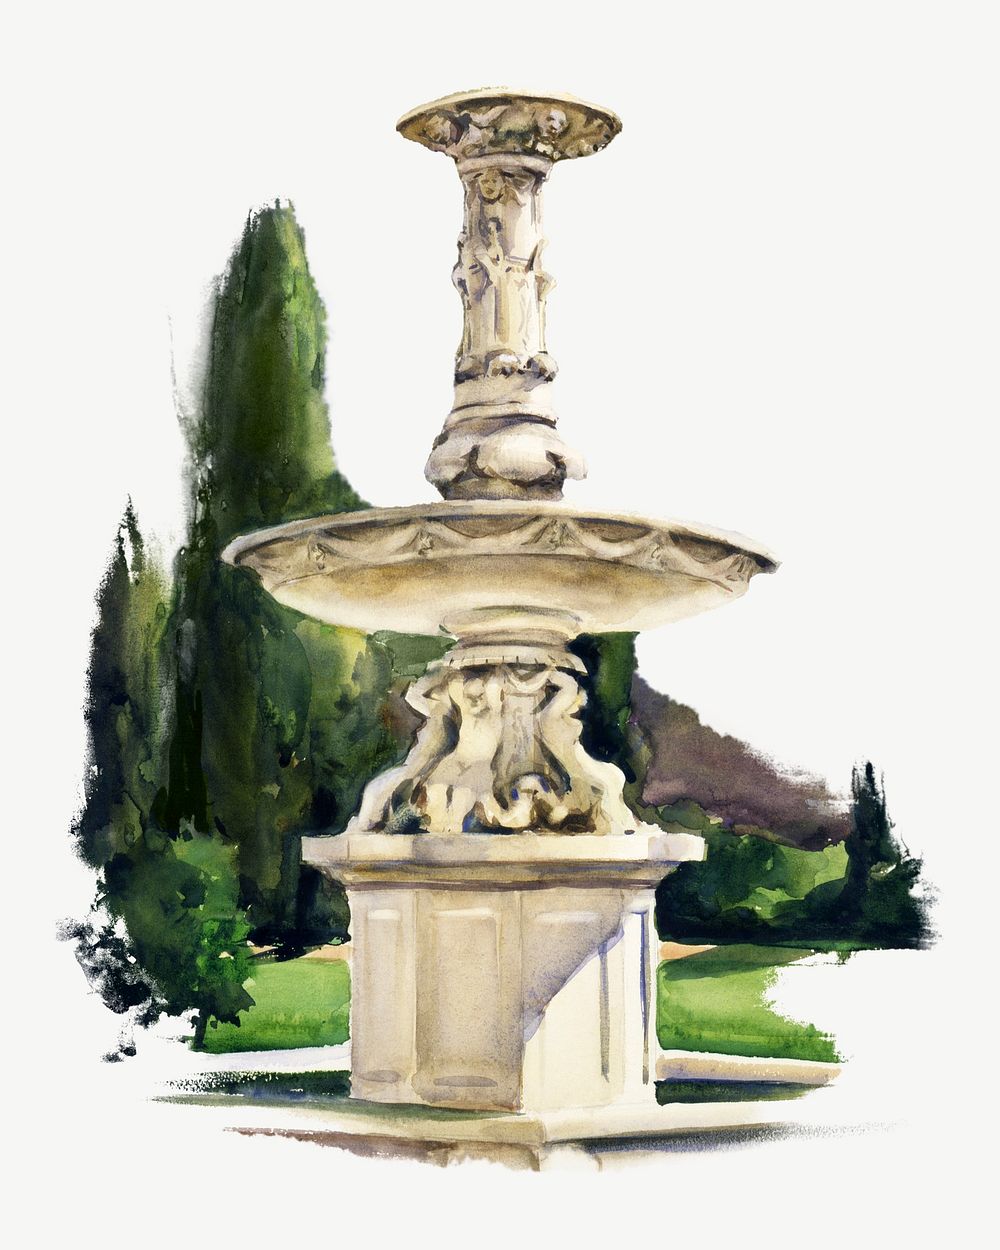 Vintage marble fountain illustration psd. Remixed by rawpixel.